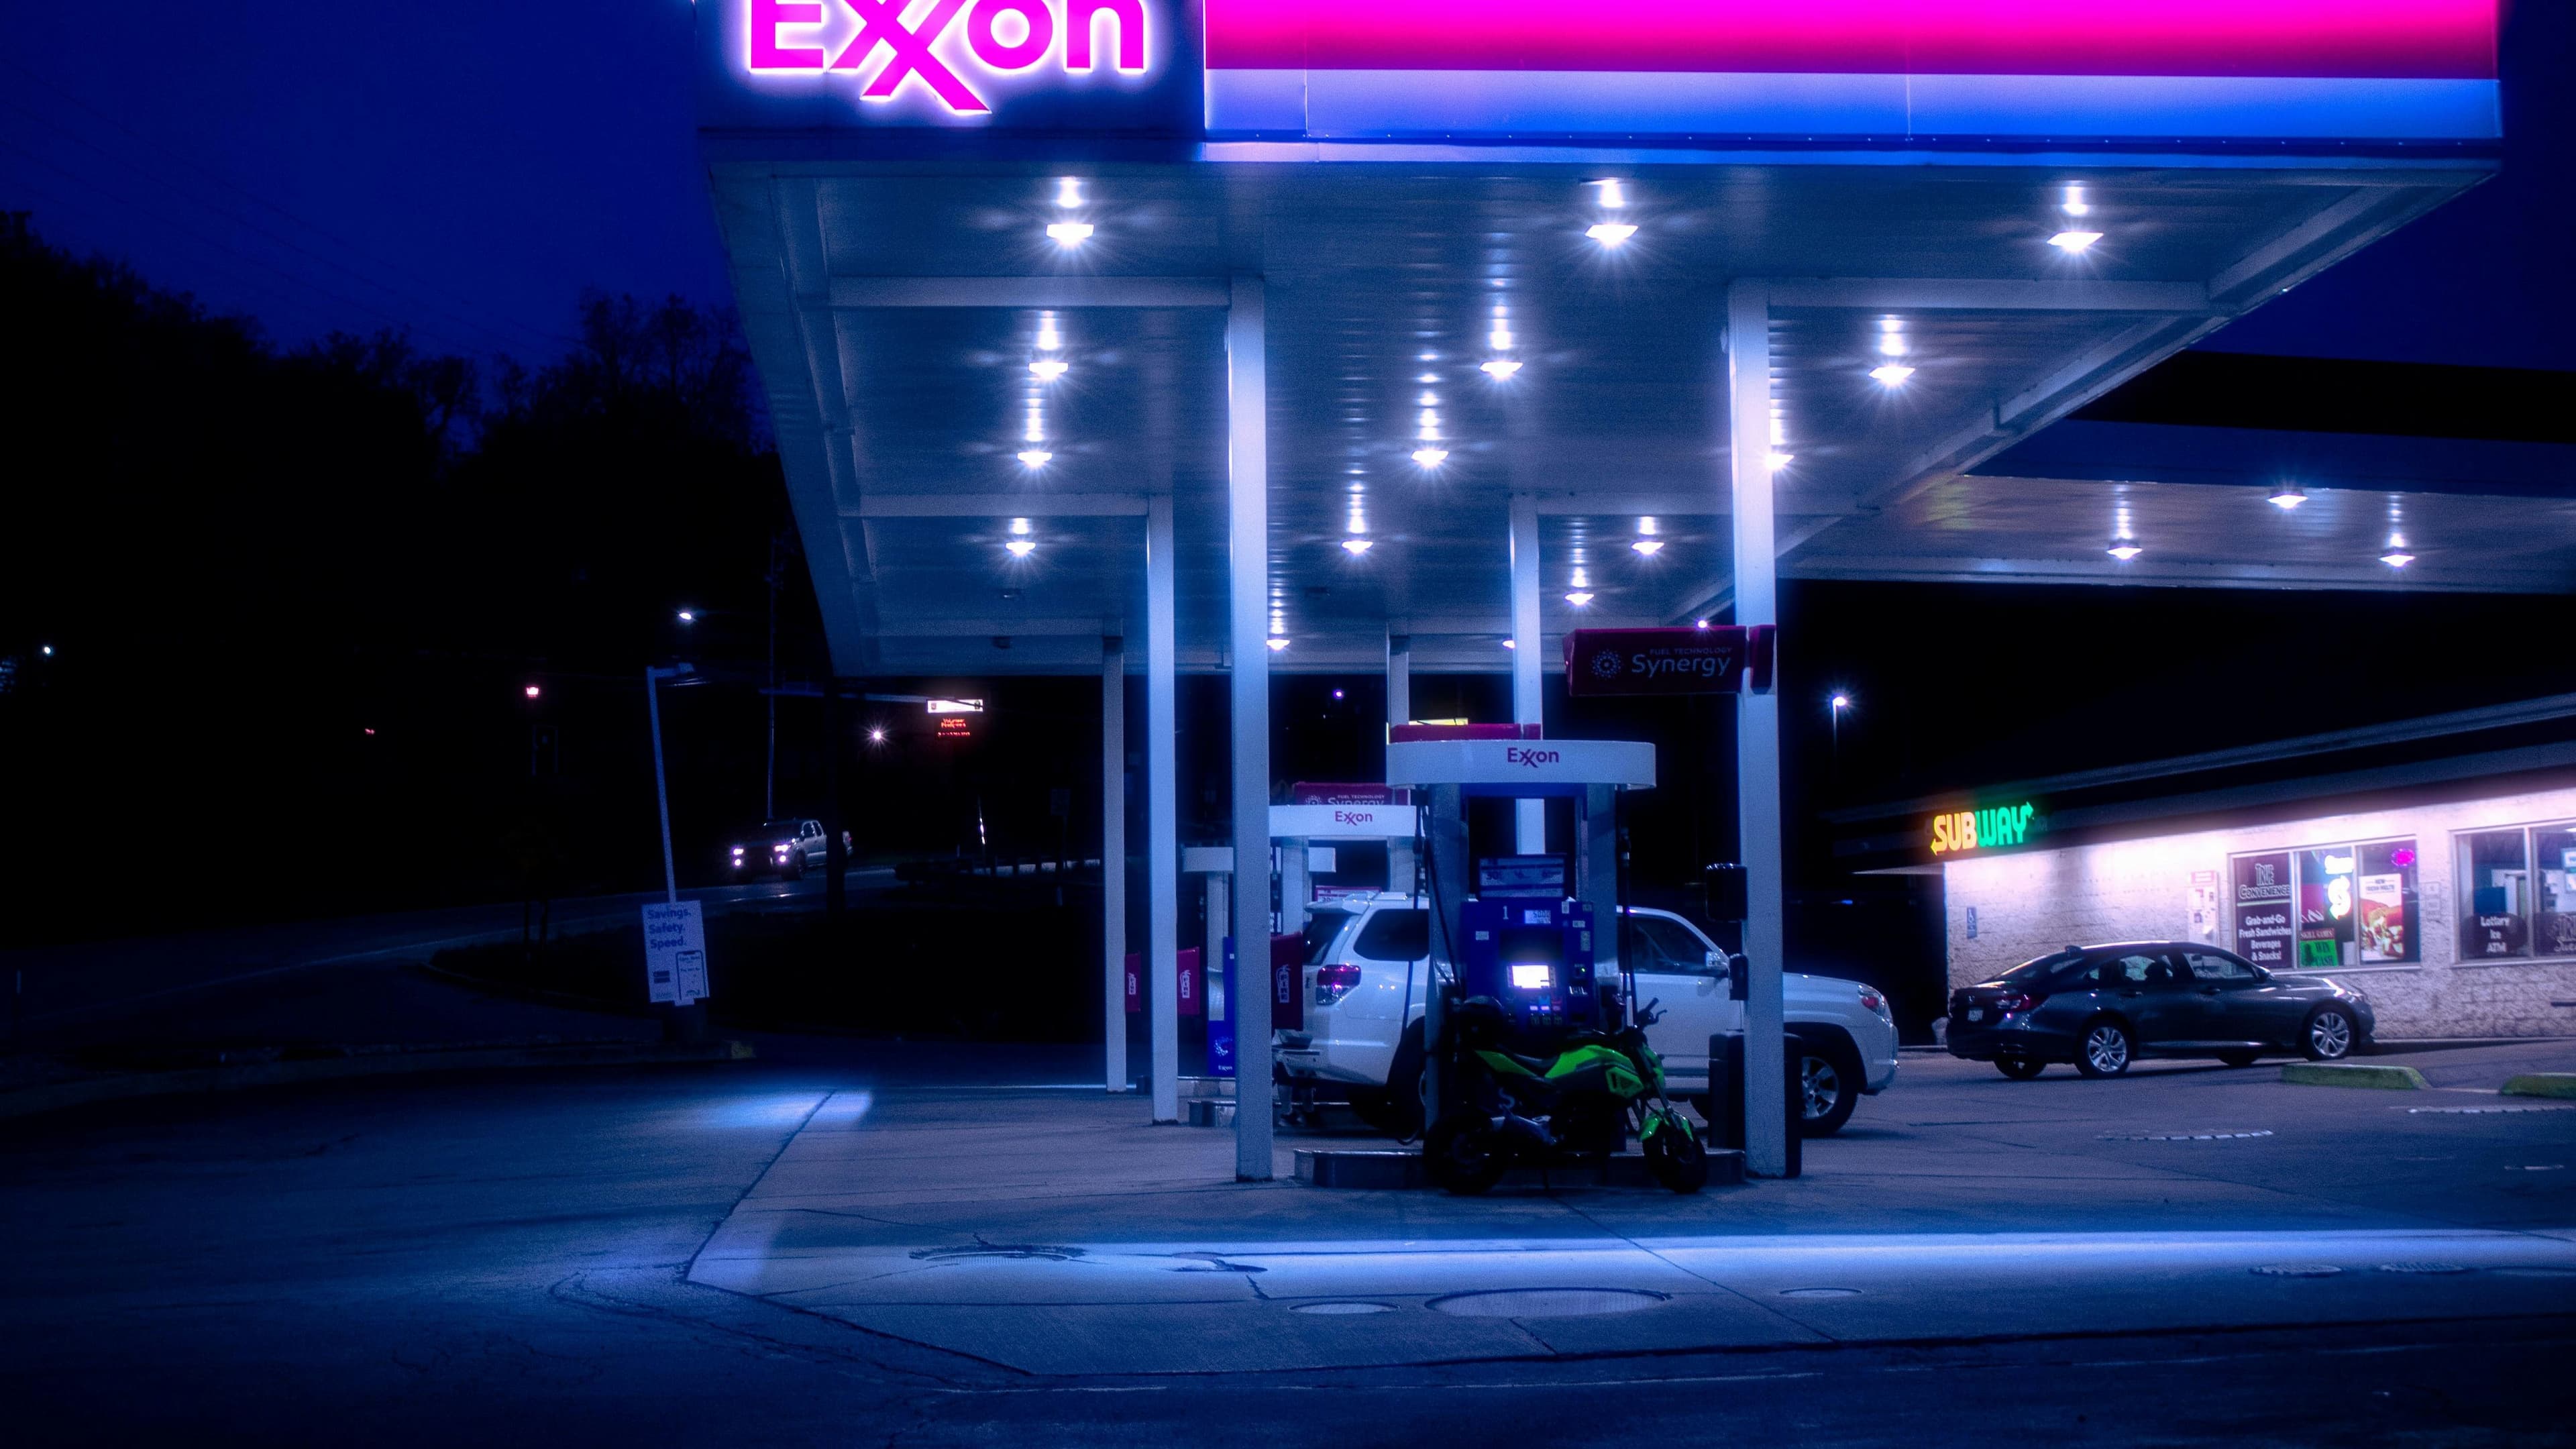 Exxon and gas markets tell different stories